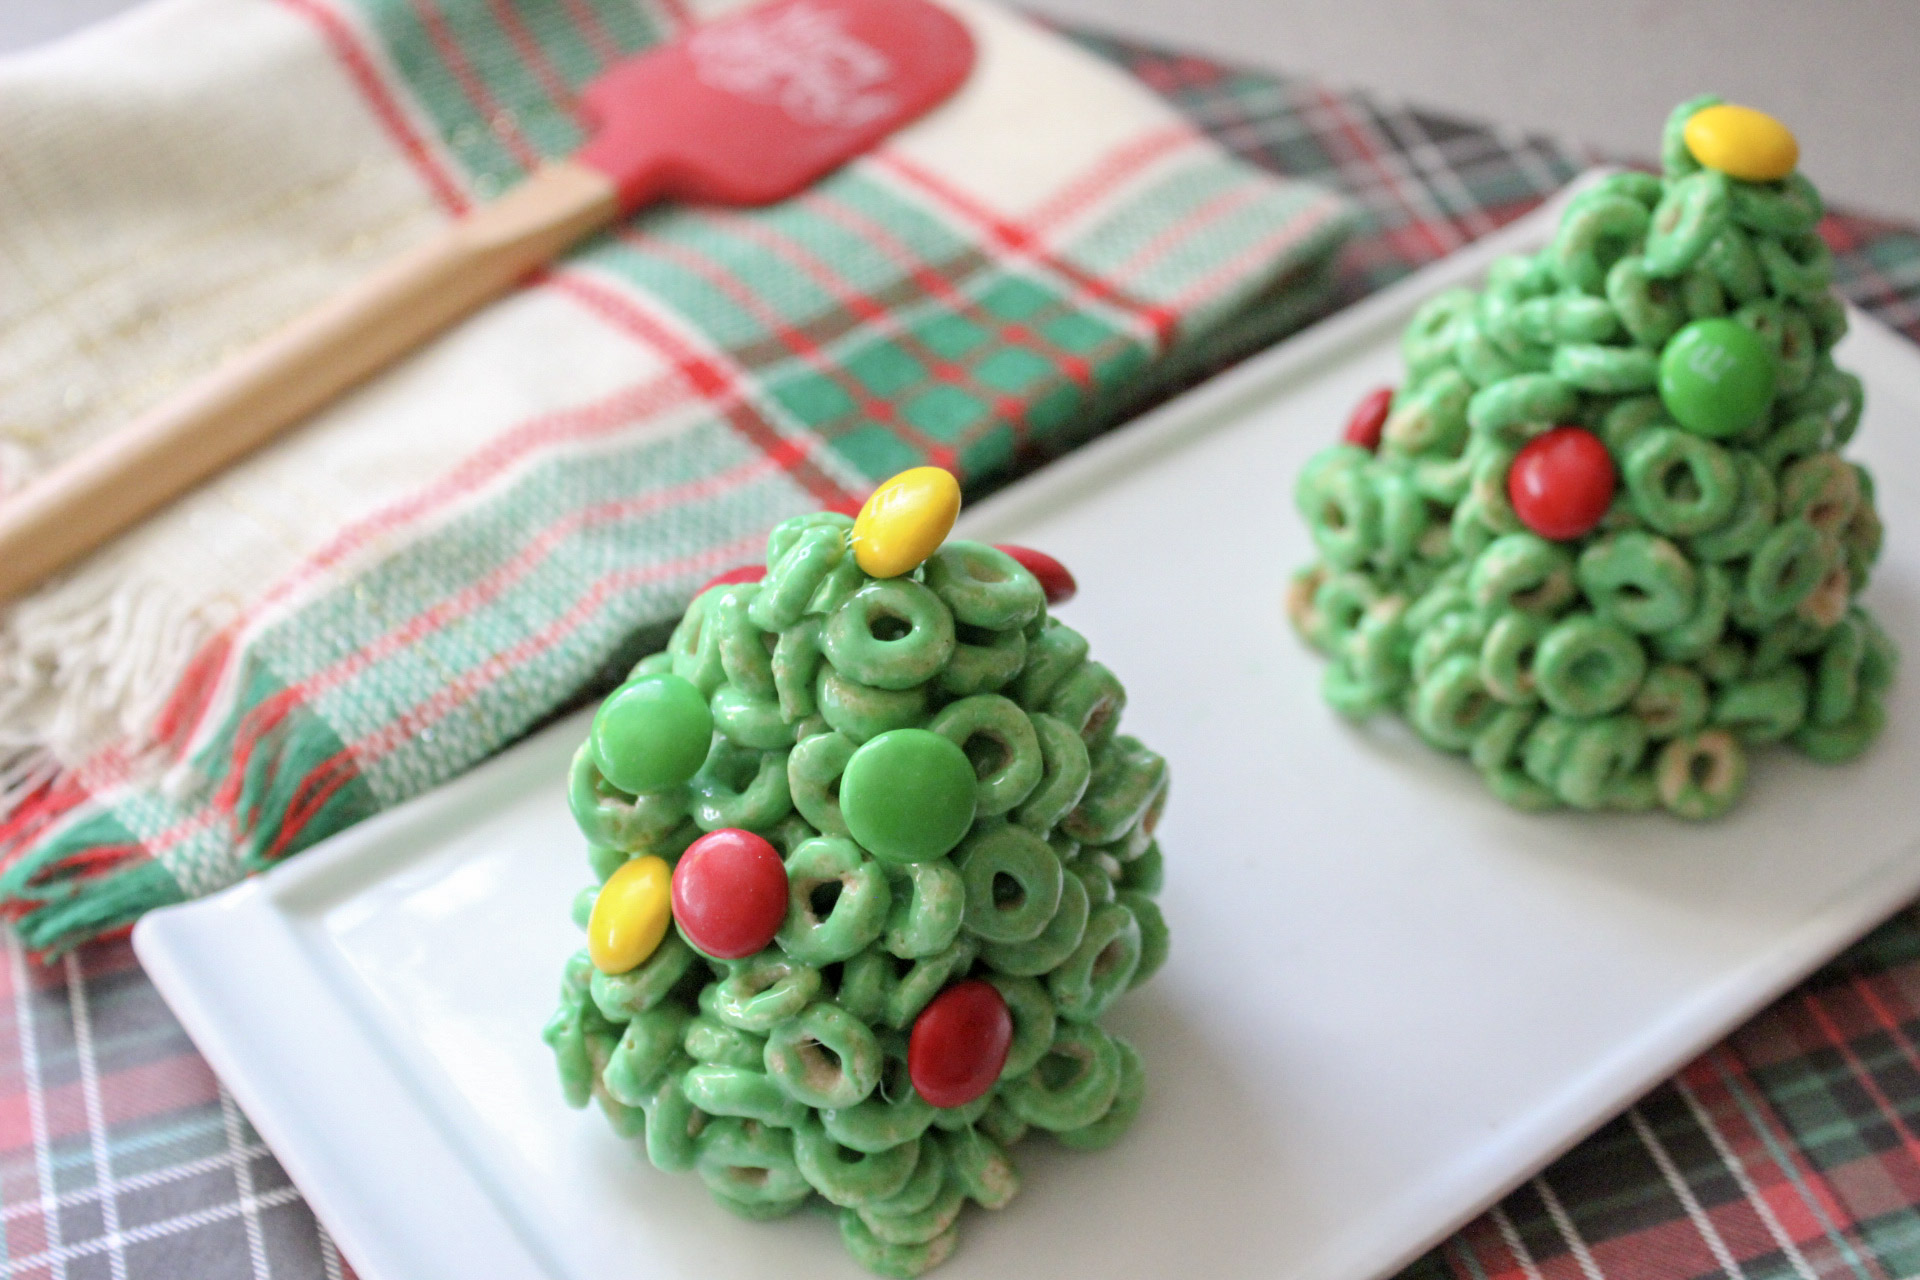 Cheerio Christmas Trees are a fun way to ring in the holidays with delicious snacks.